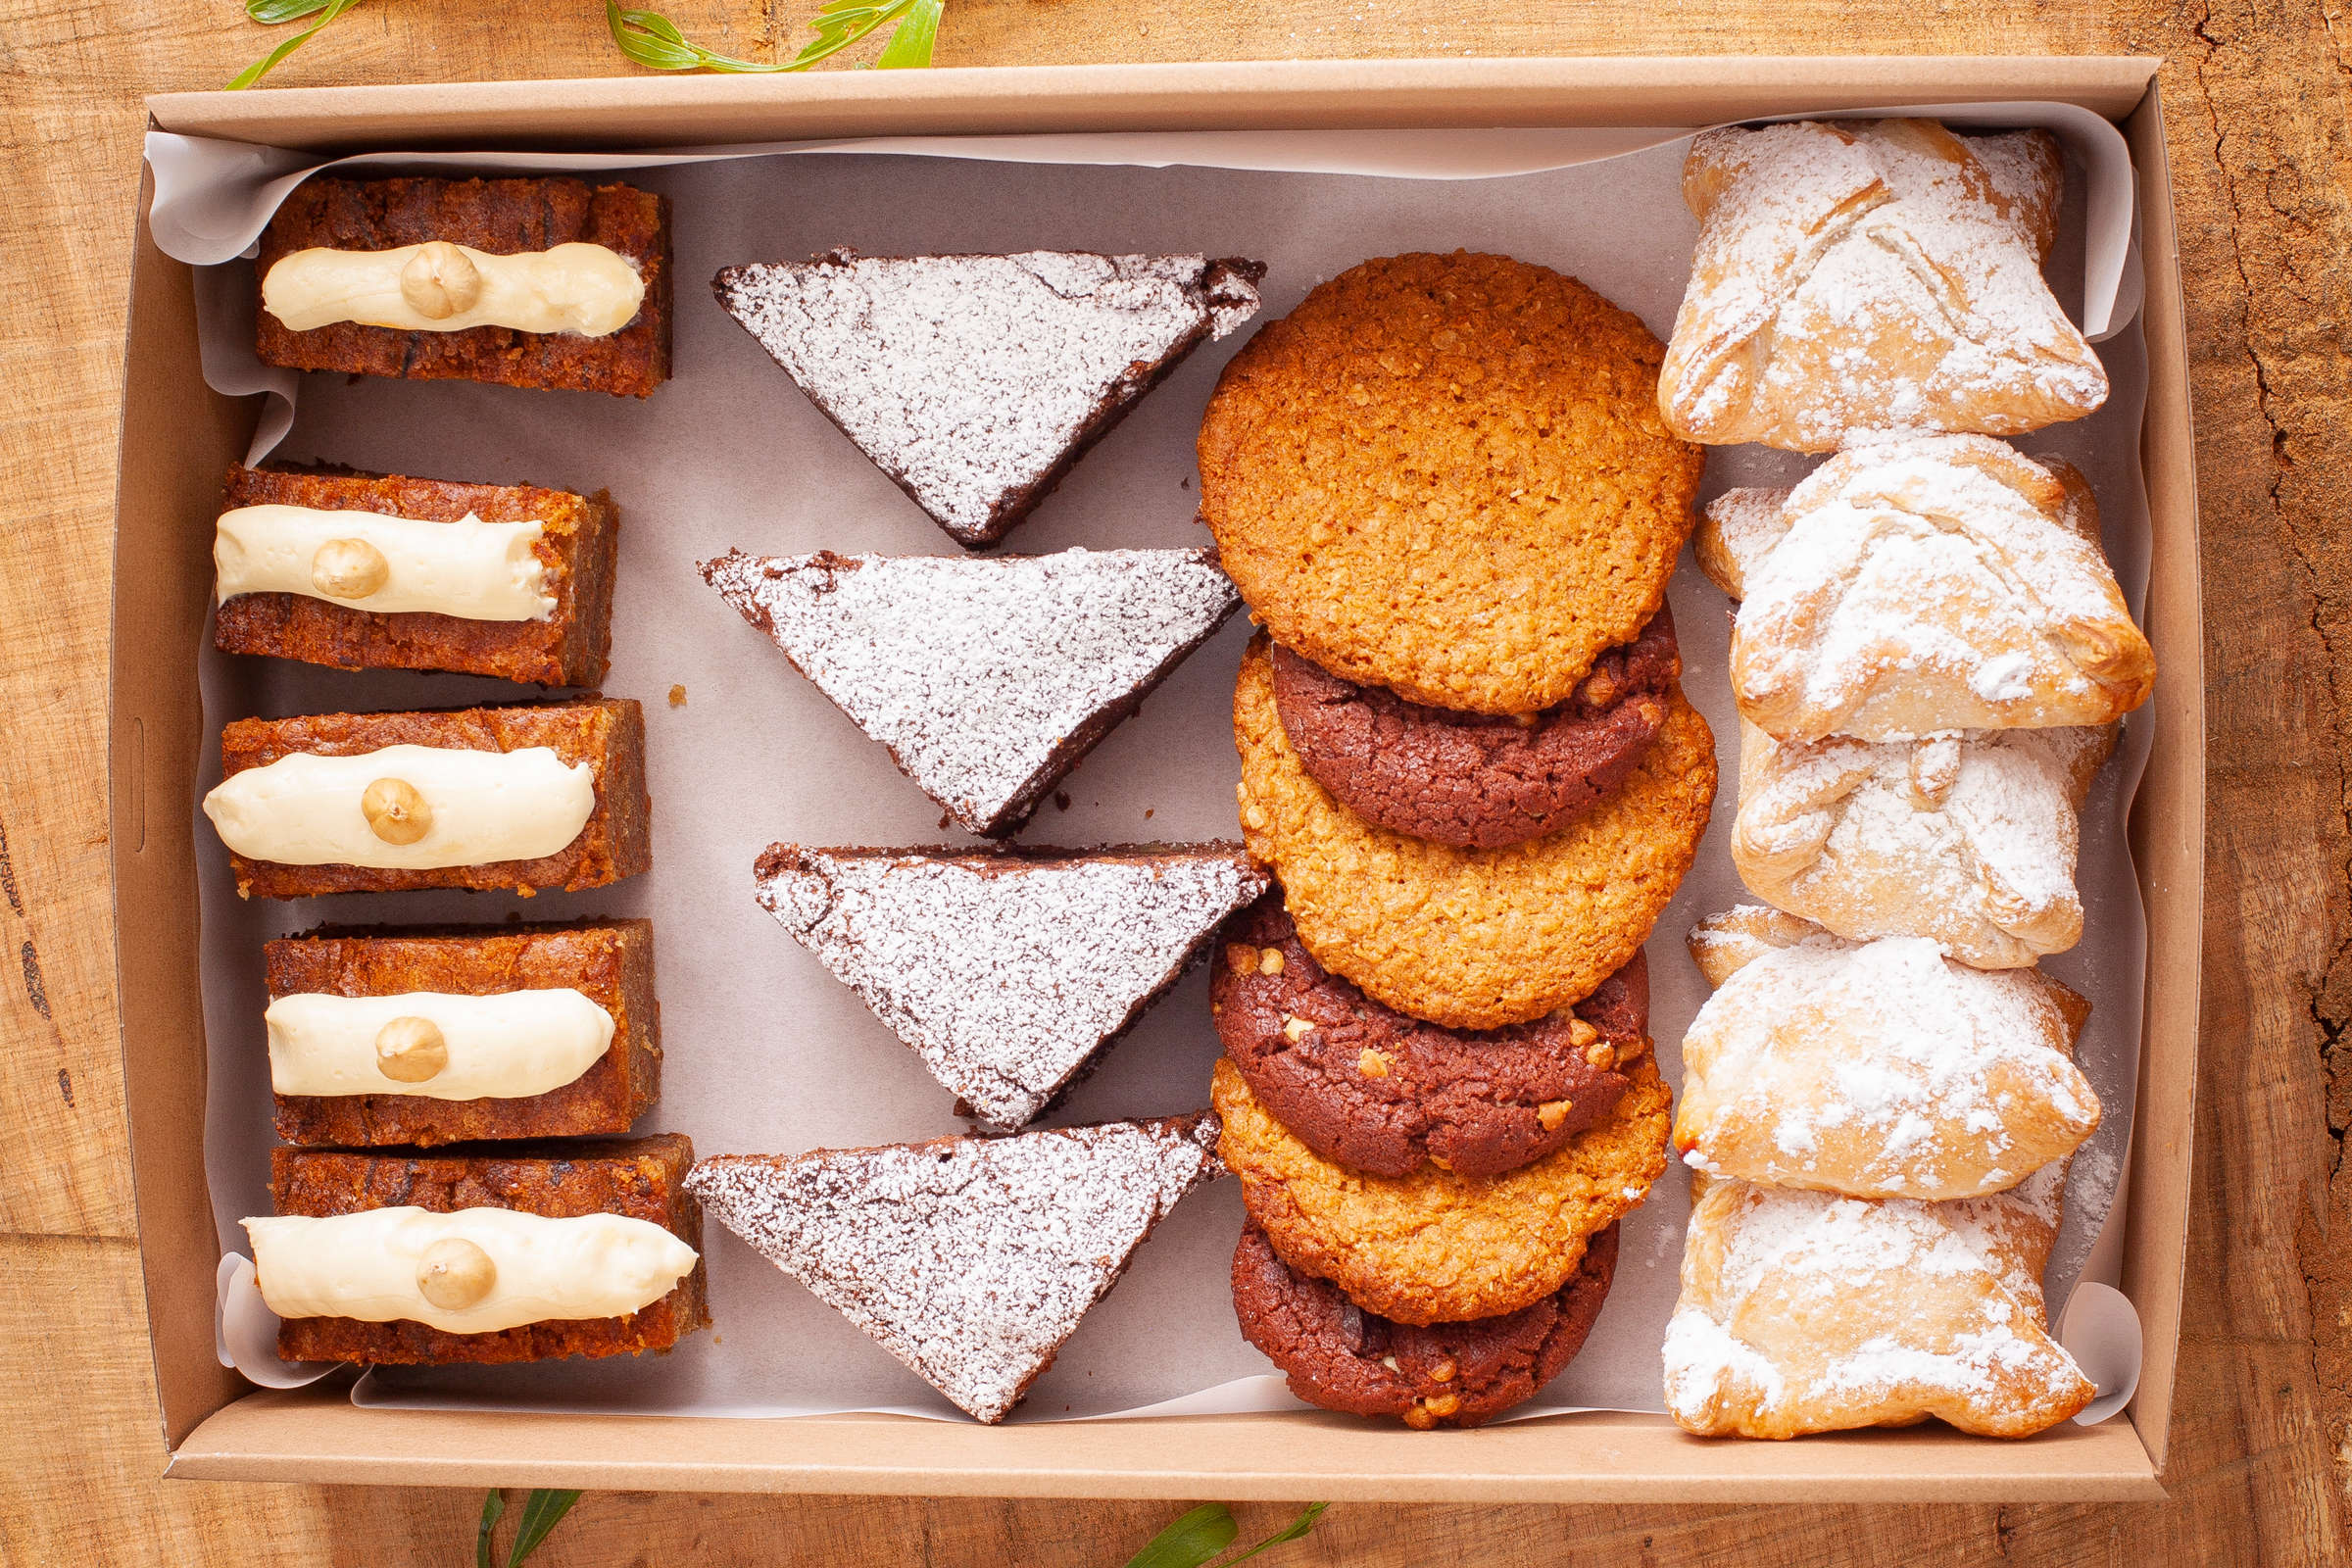 Large sweet selection box containing 20 items including chocolate brownie, Danish pastries, Carrot cake with cream cheese icing, Cookies. Credit: Richard Jupe.